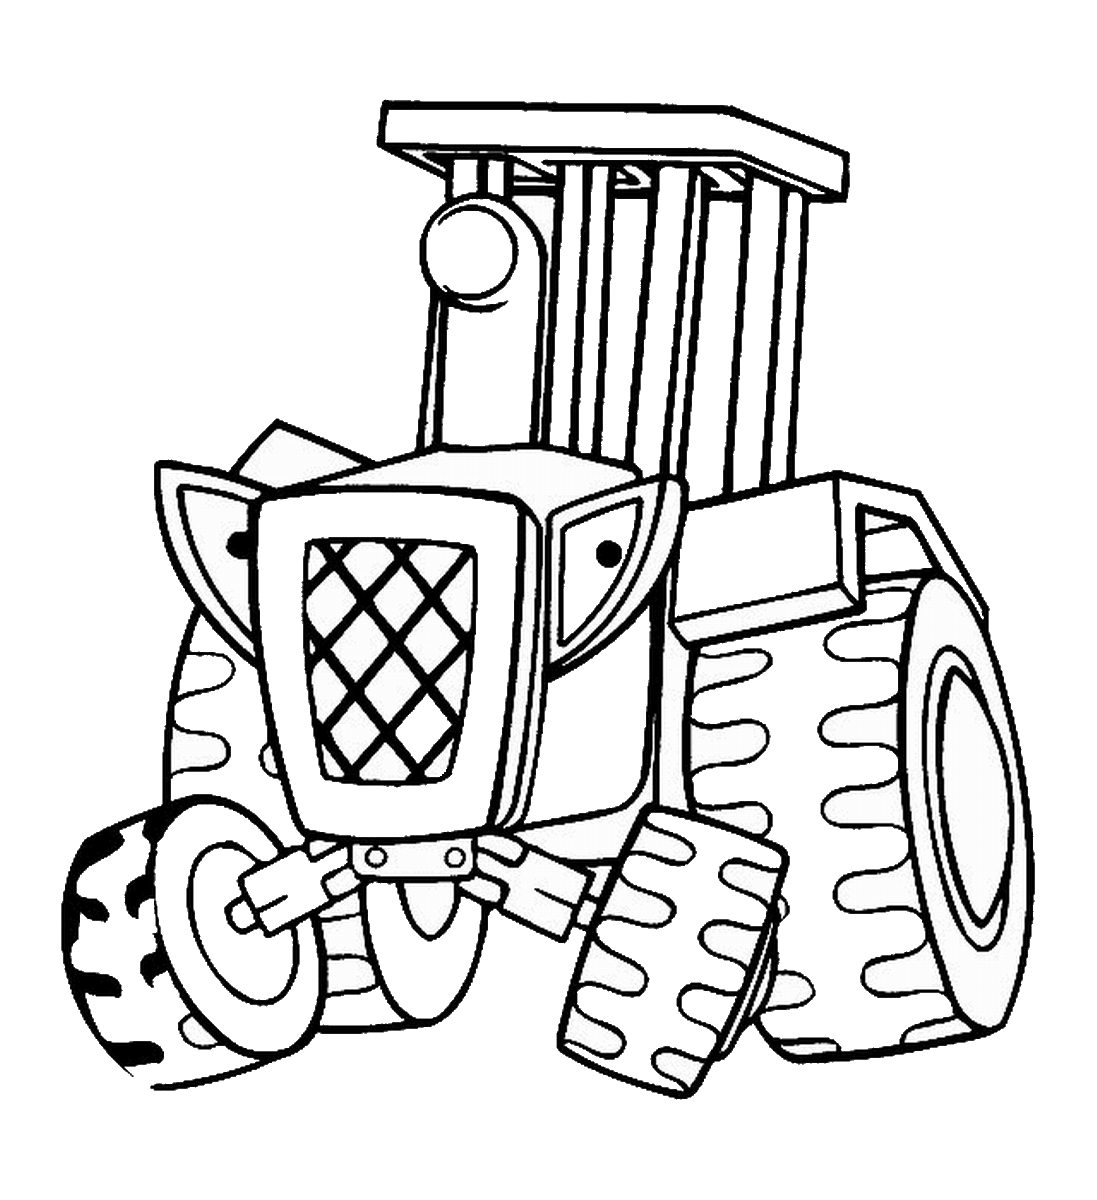 John Deere Tractor Coloring Pages for boys Printable 2020 0496 Coloring4free